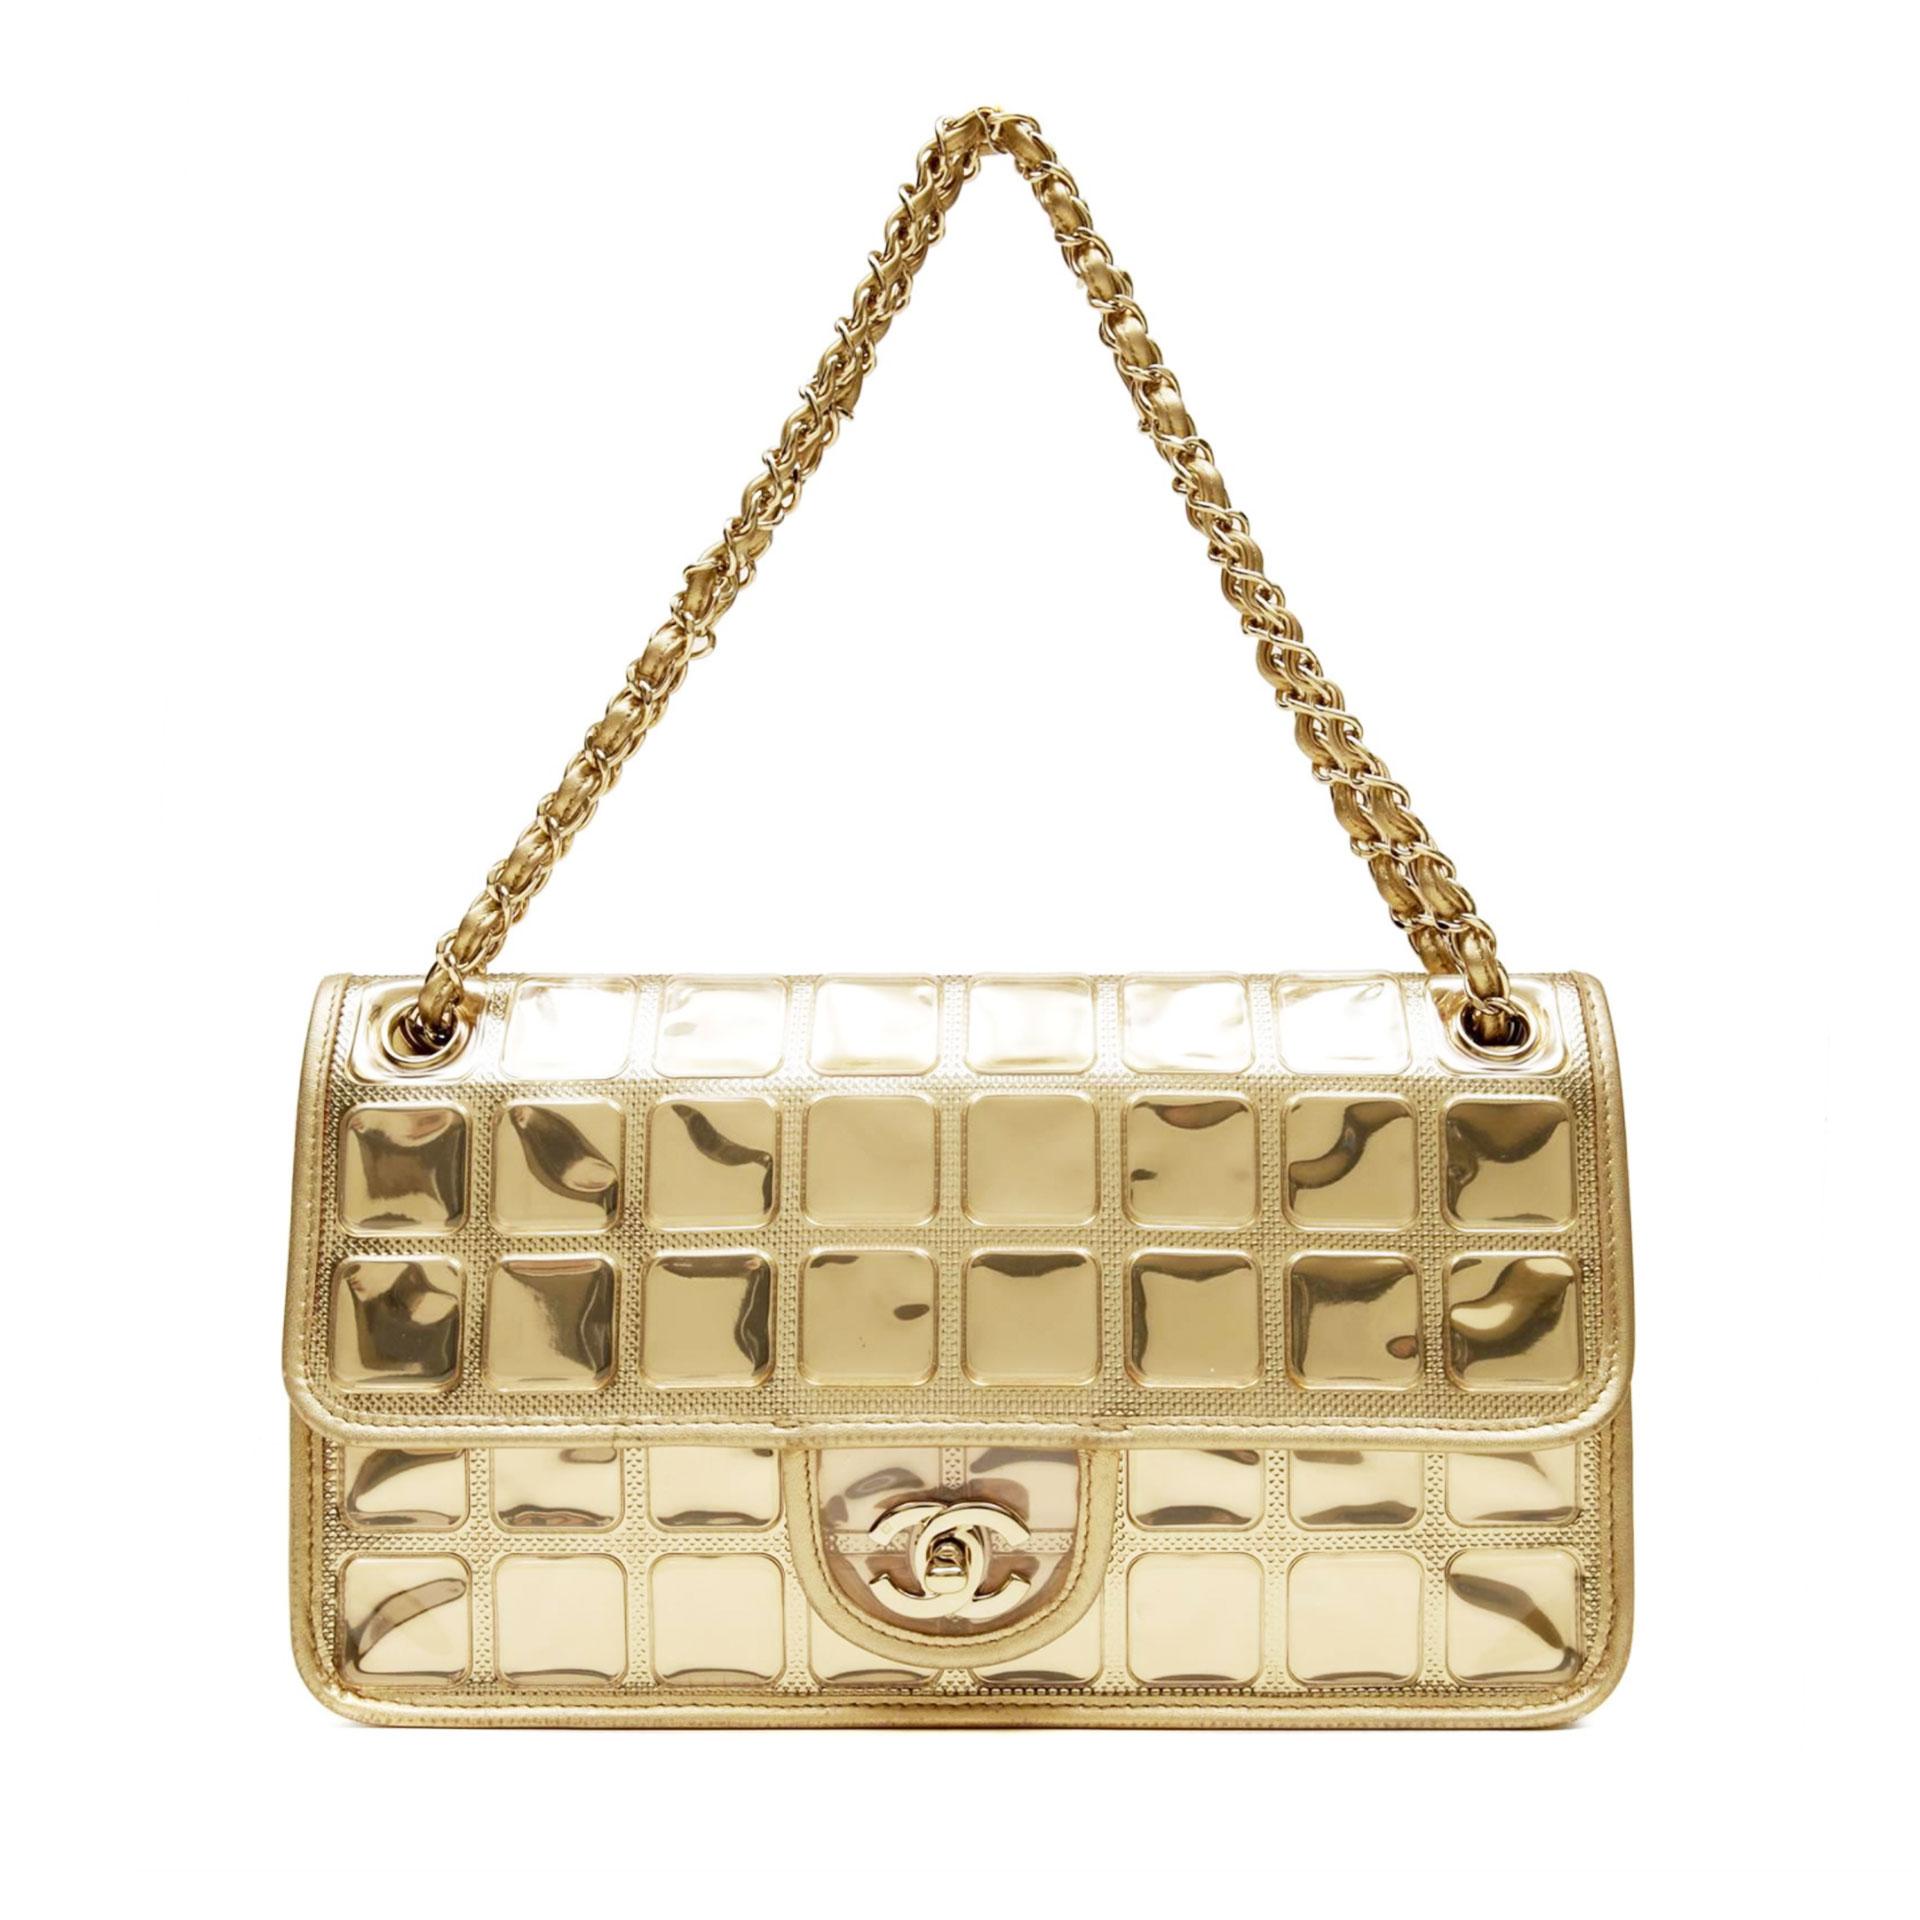 Chanel Limited Edition Ice Cube Flap Metallic Gold Lambskin Leather Shoulder Bag For Sale 1